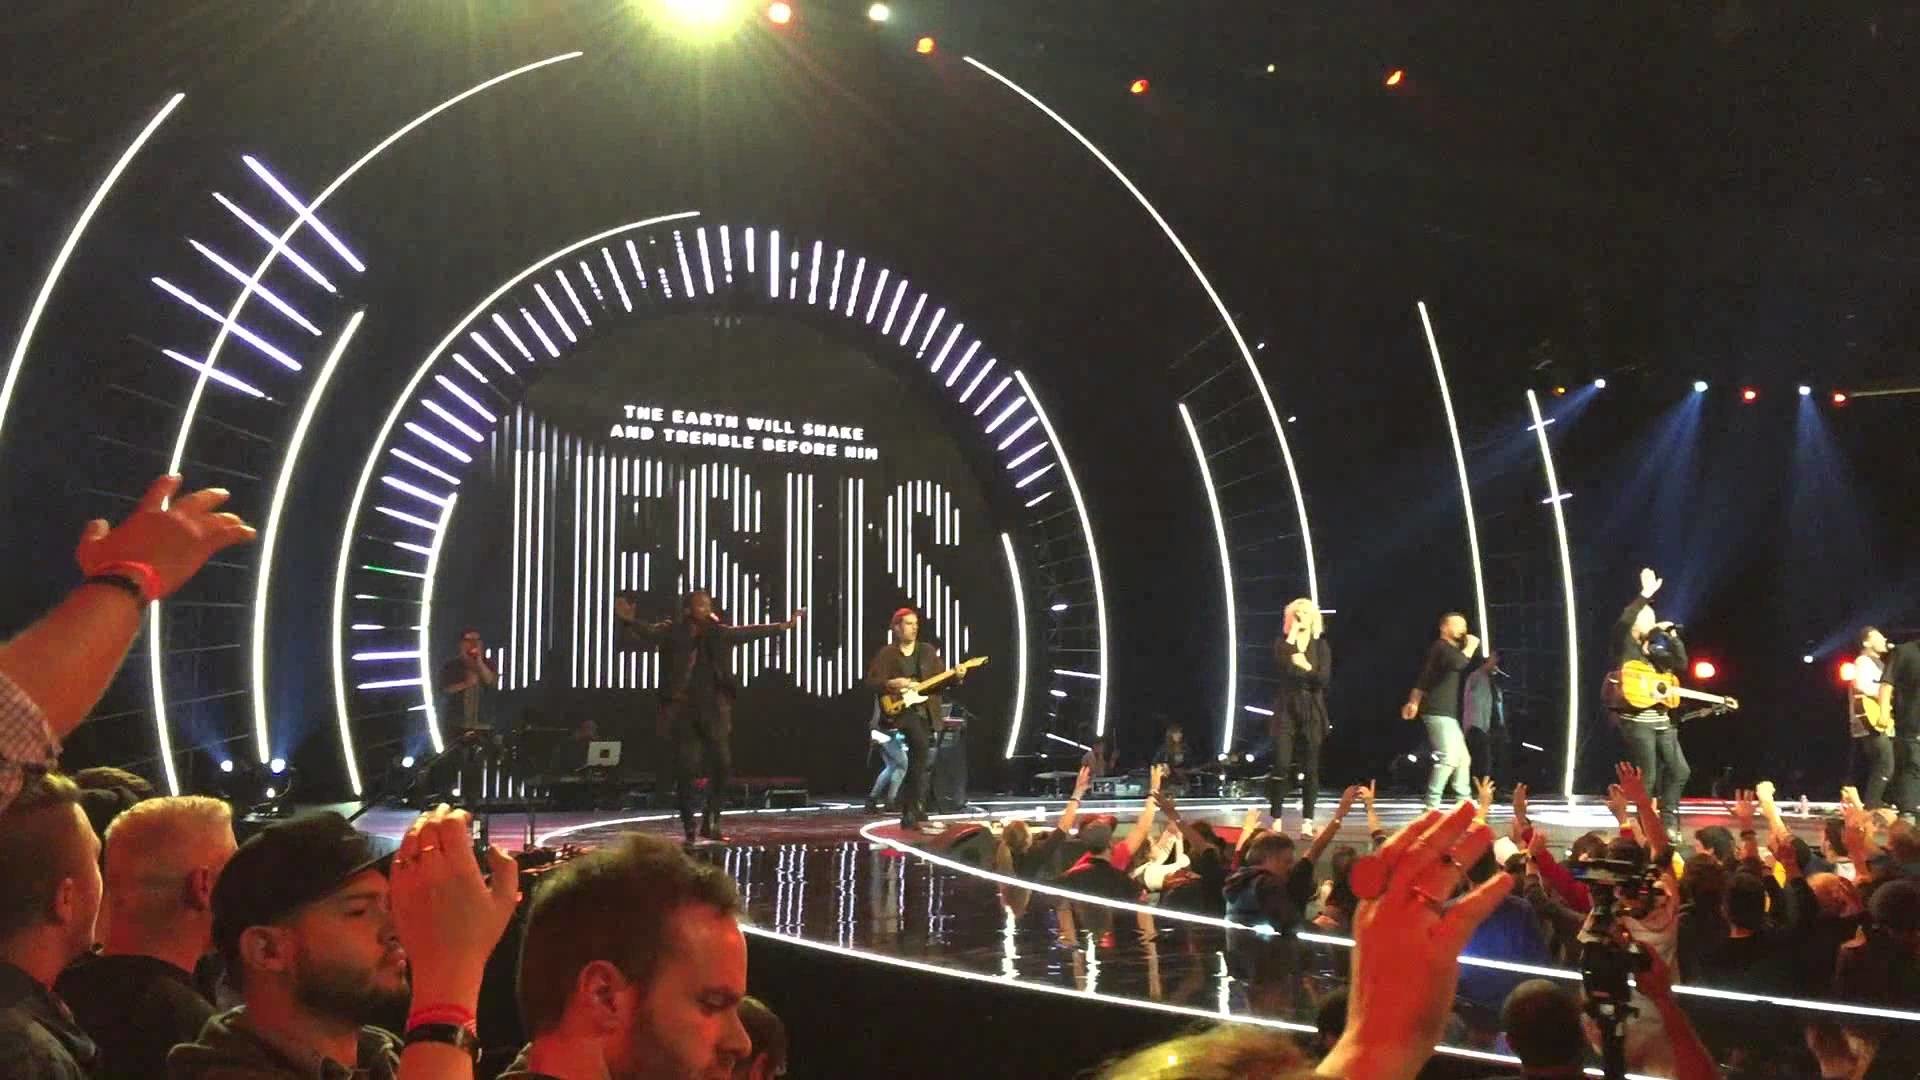 1920x1080 Hillsong Conference Prudential Center Newark NJ